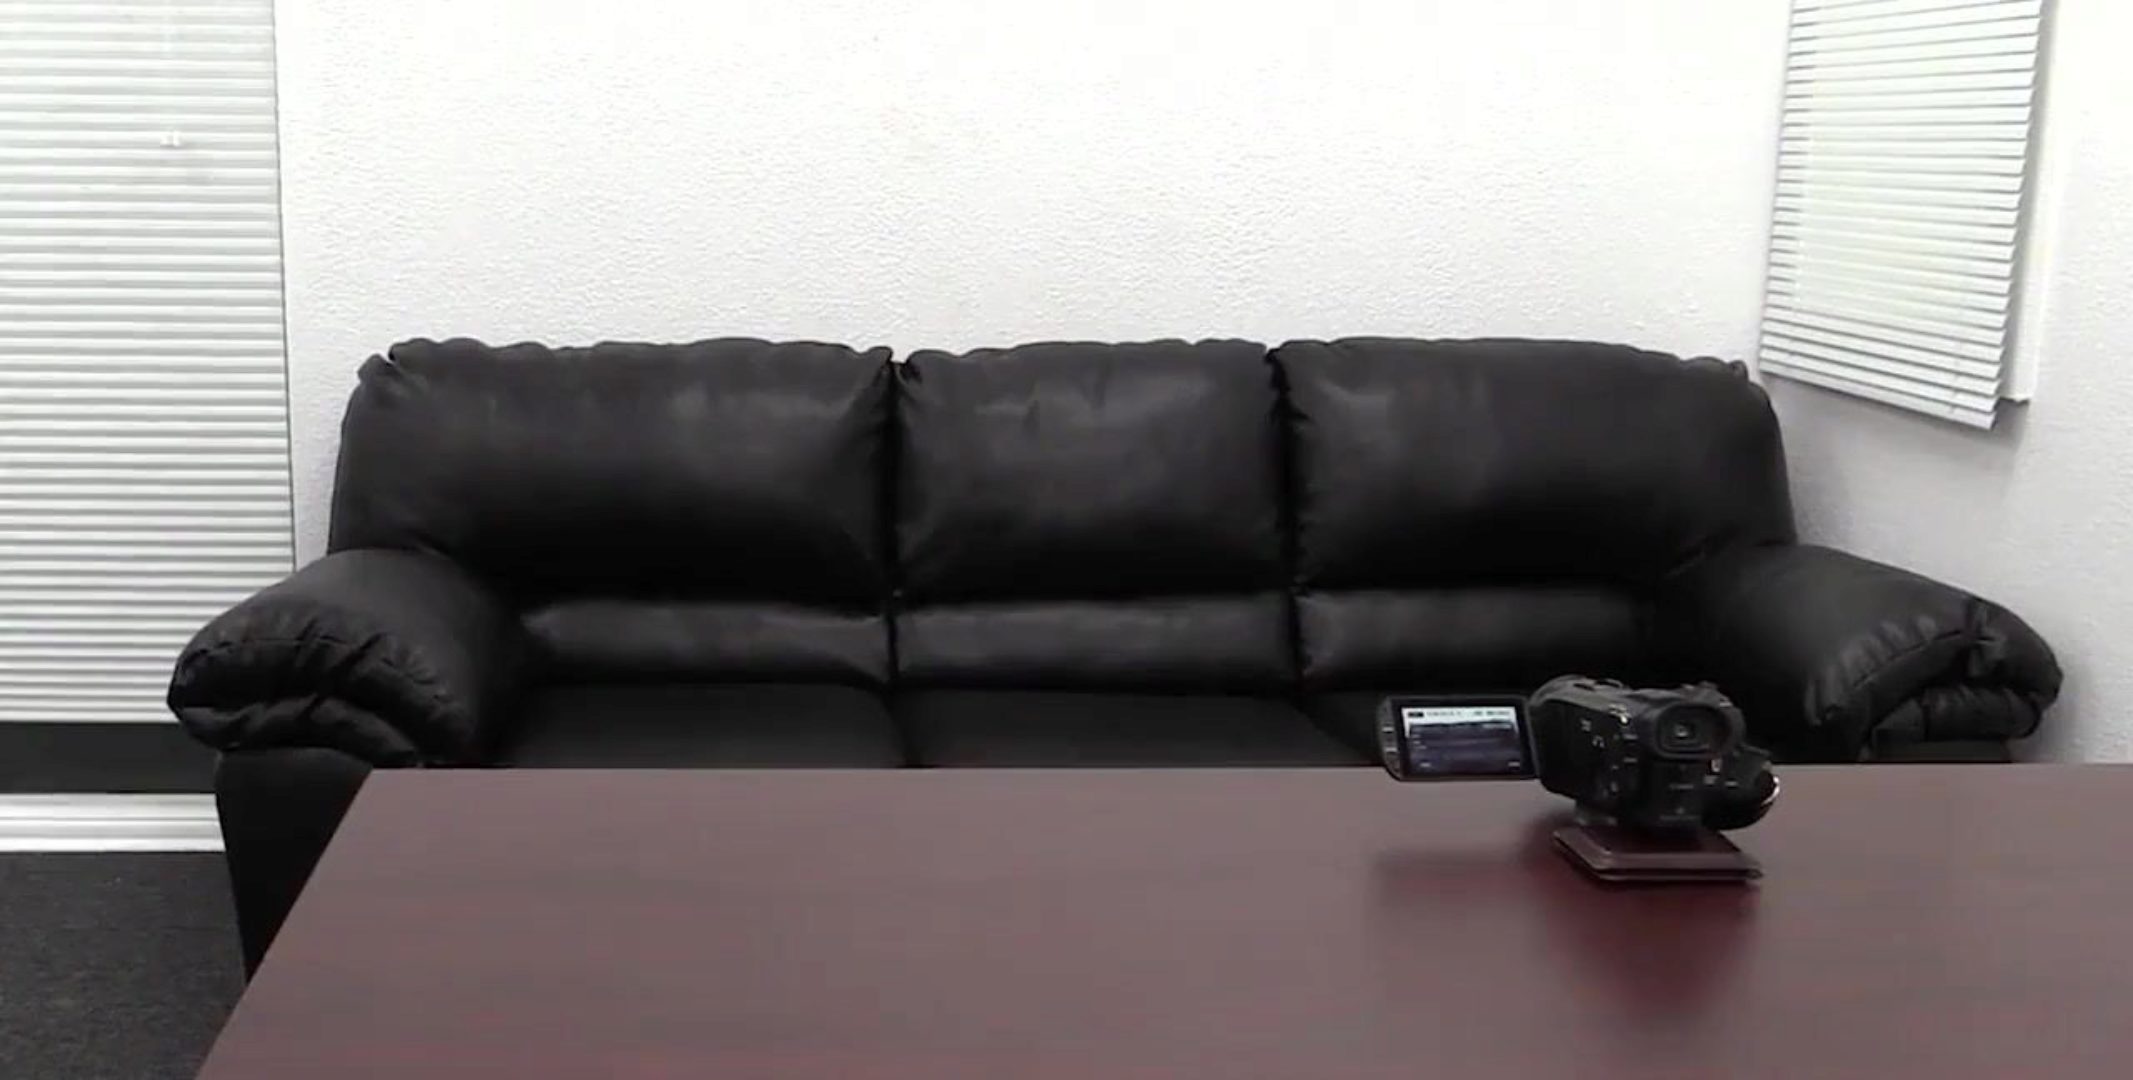 Backroom Casting Couch Anal Creampie